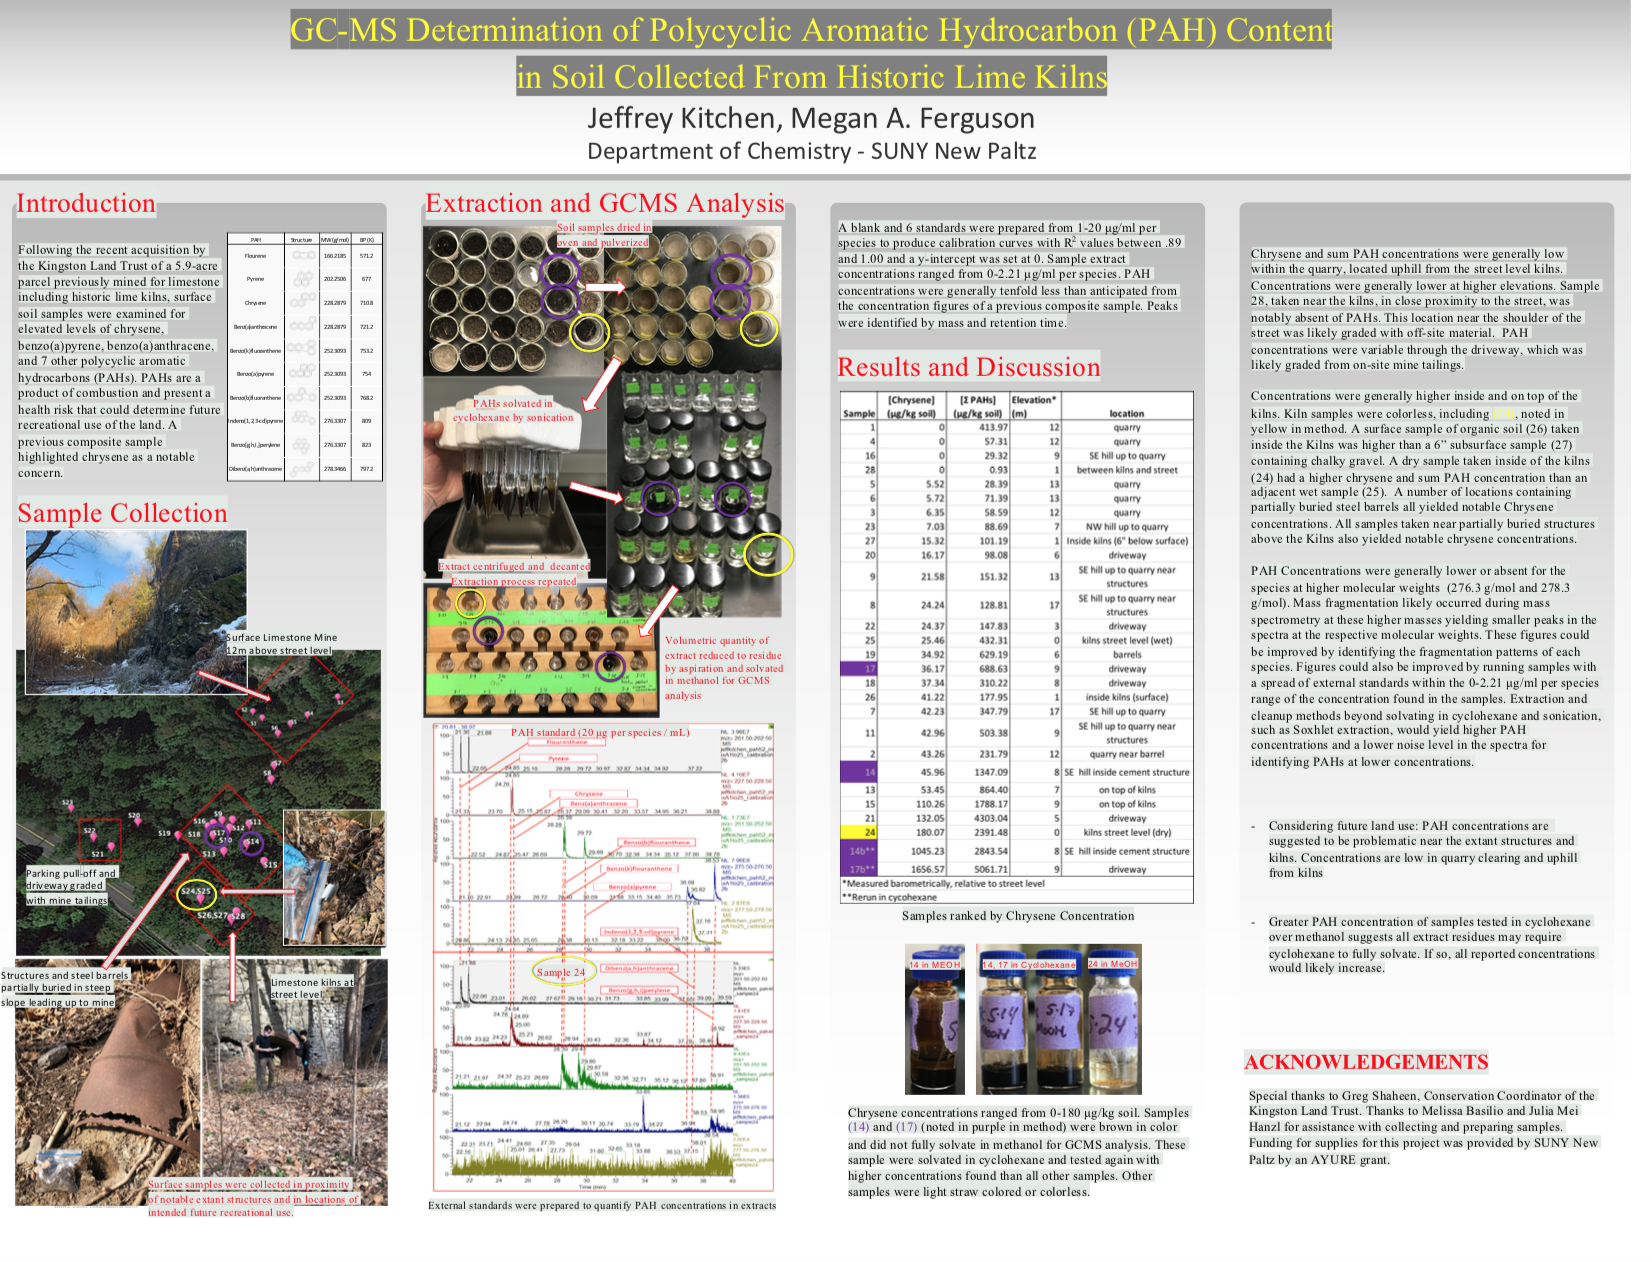 Showcase Image for GC-MS Determination of Polycyclic Aromatic Hydrocarbon (PAH) Content in Soil Collected From Historic Lime Kilns